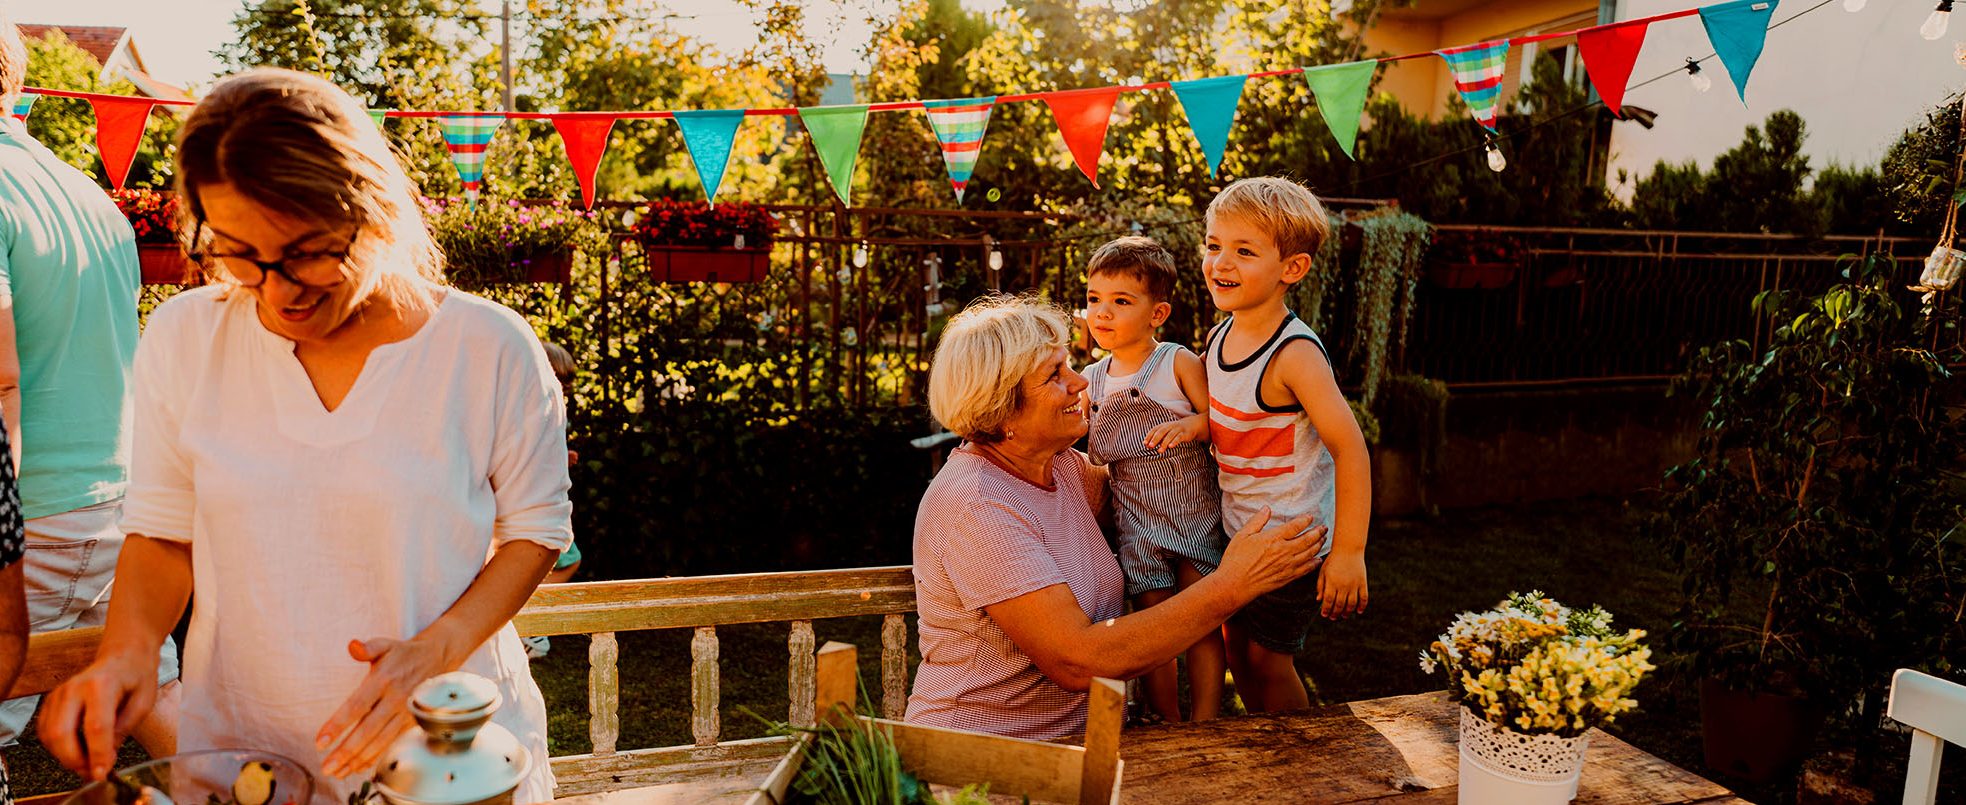 A woman smiles and embraces two young children at a backyard gathering.